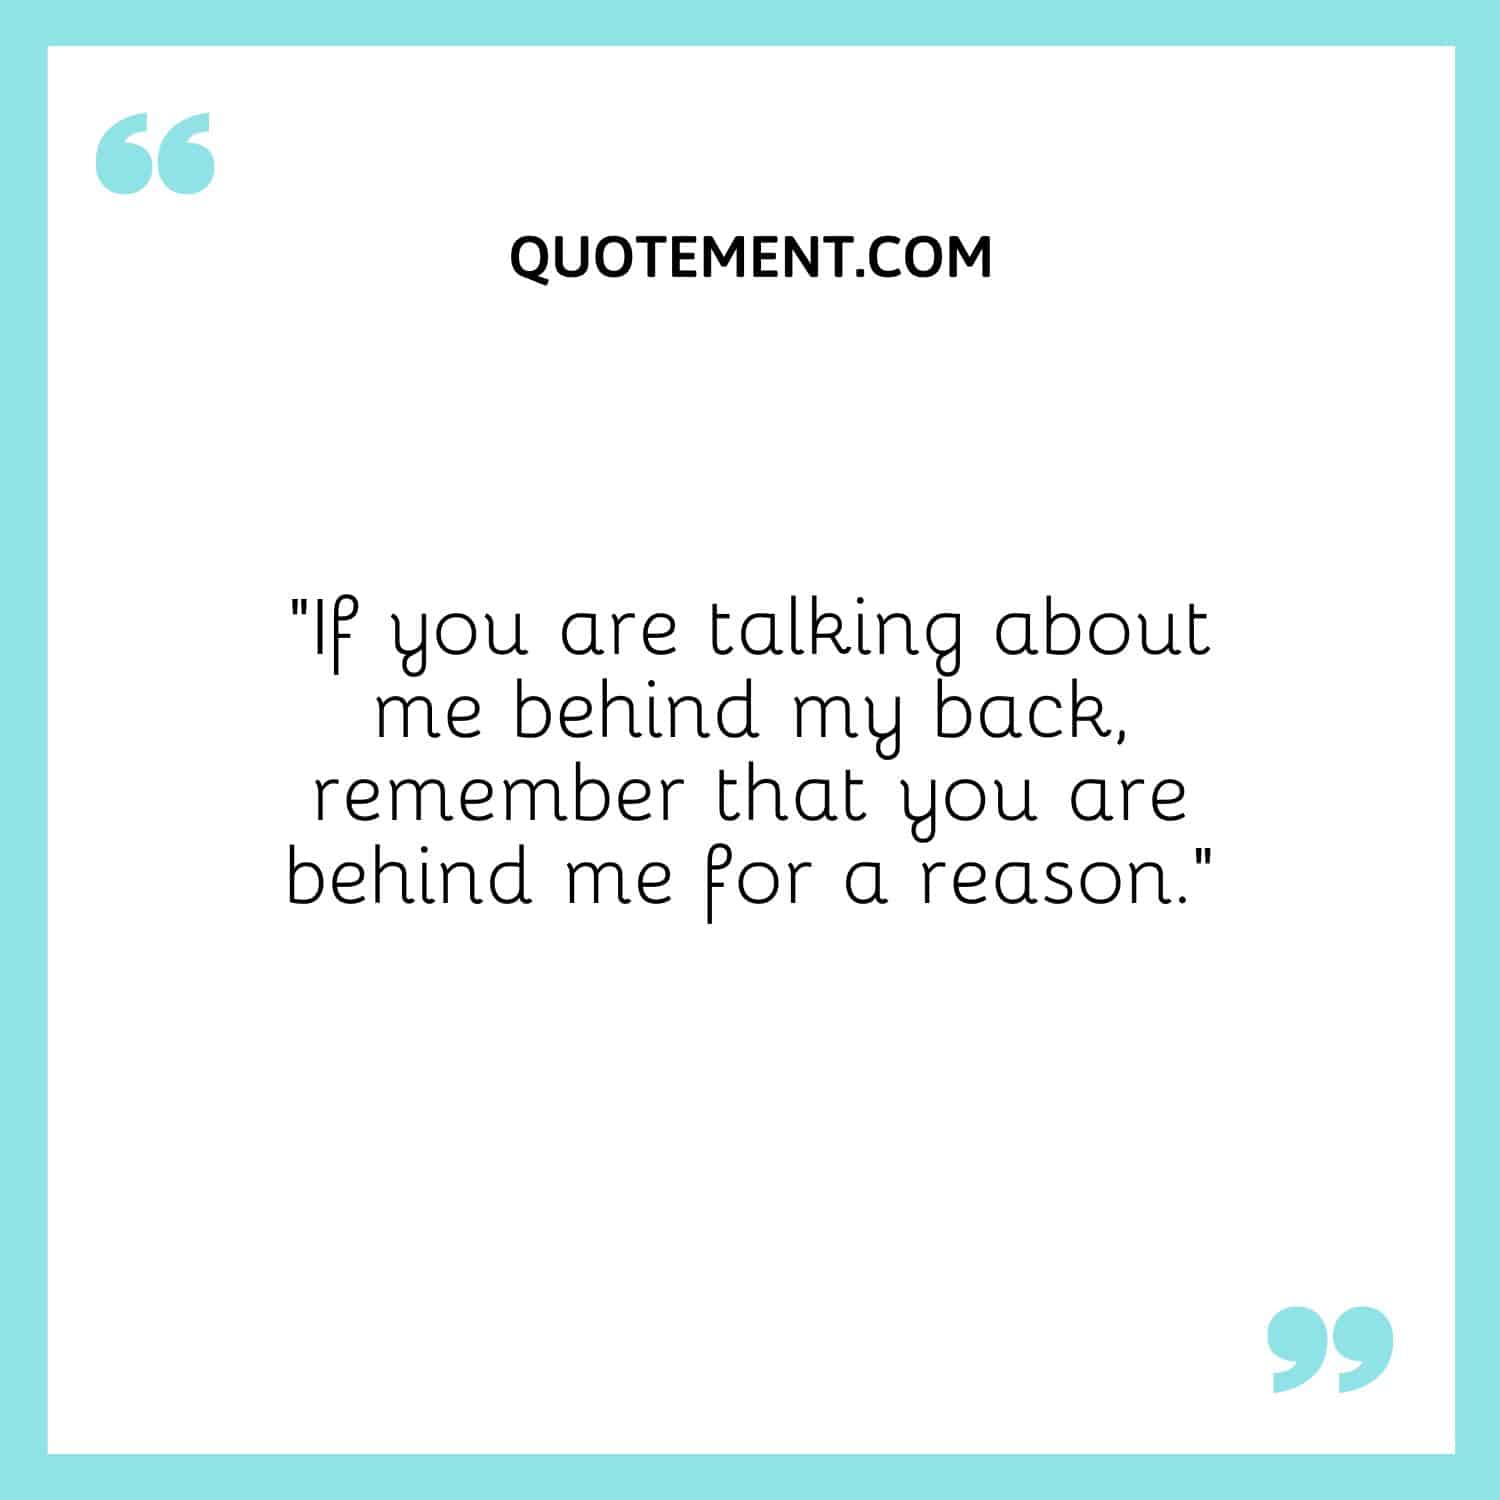 “If you are talking about me behind my back, remember that you are behind me for a reason.”